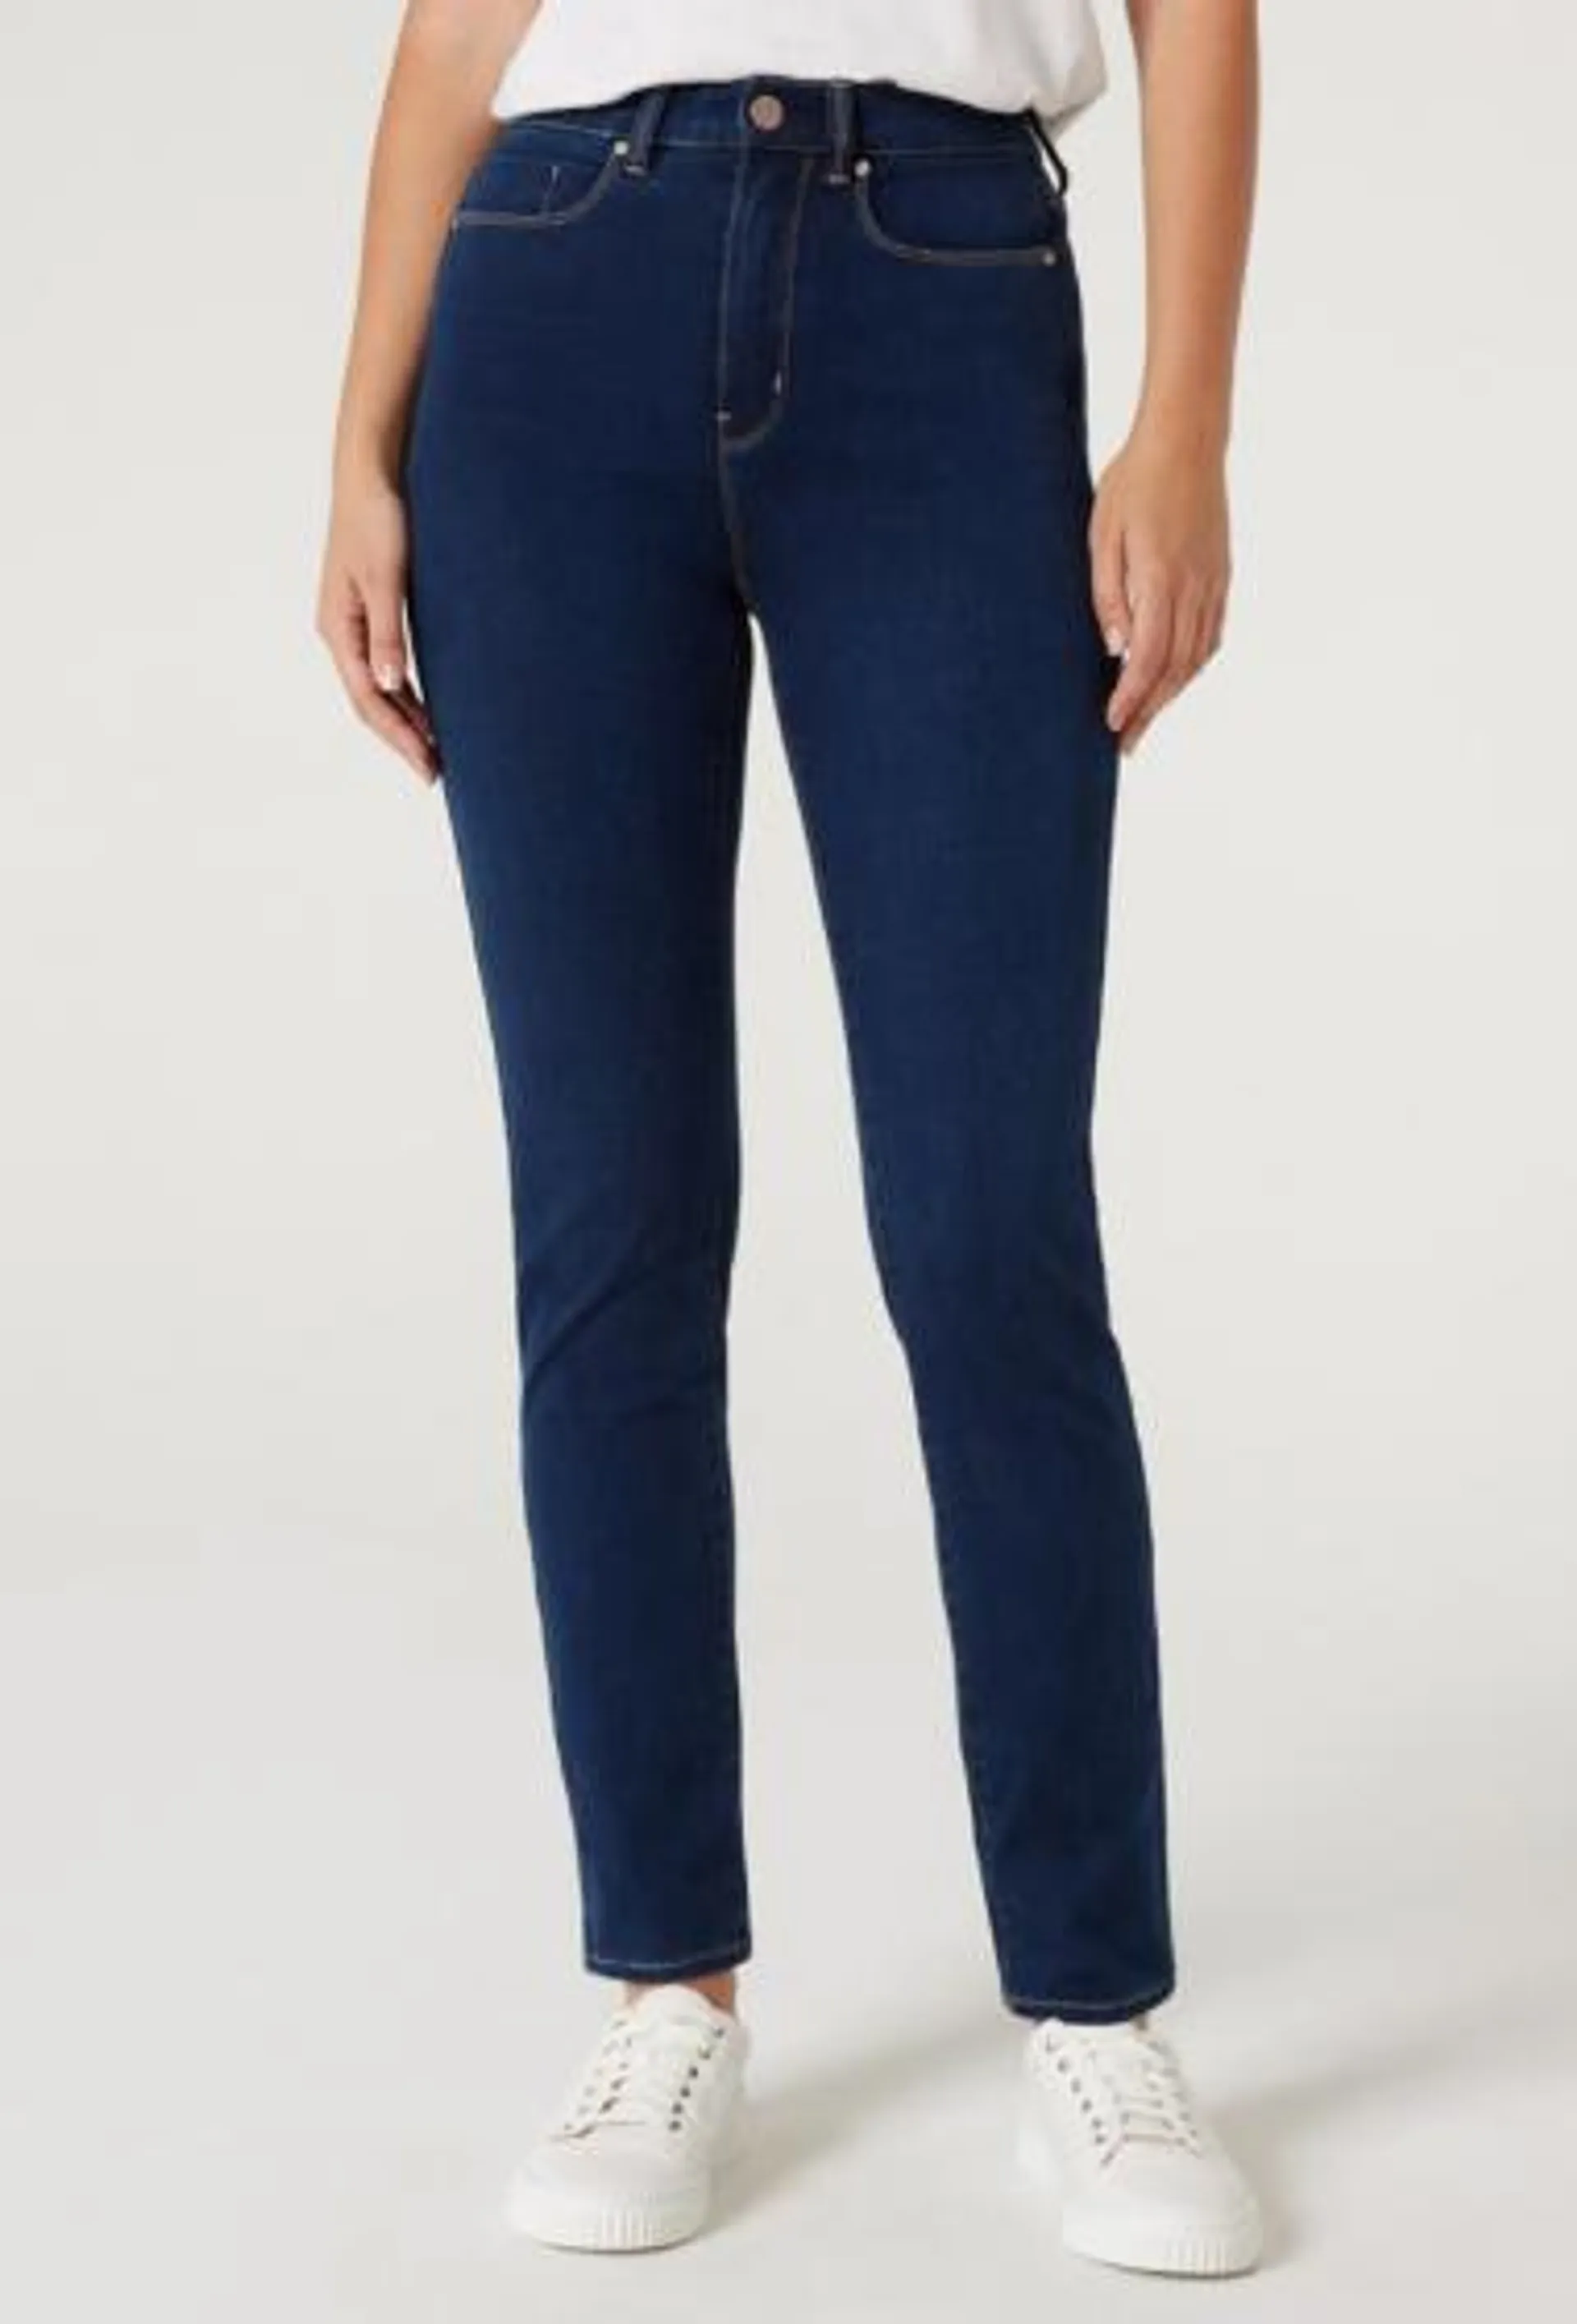 Shop Women’s Jeans by Style